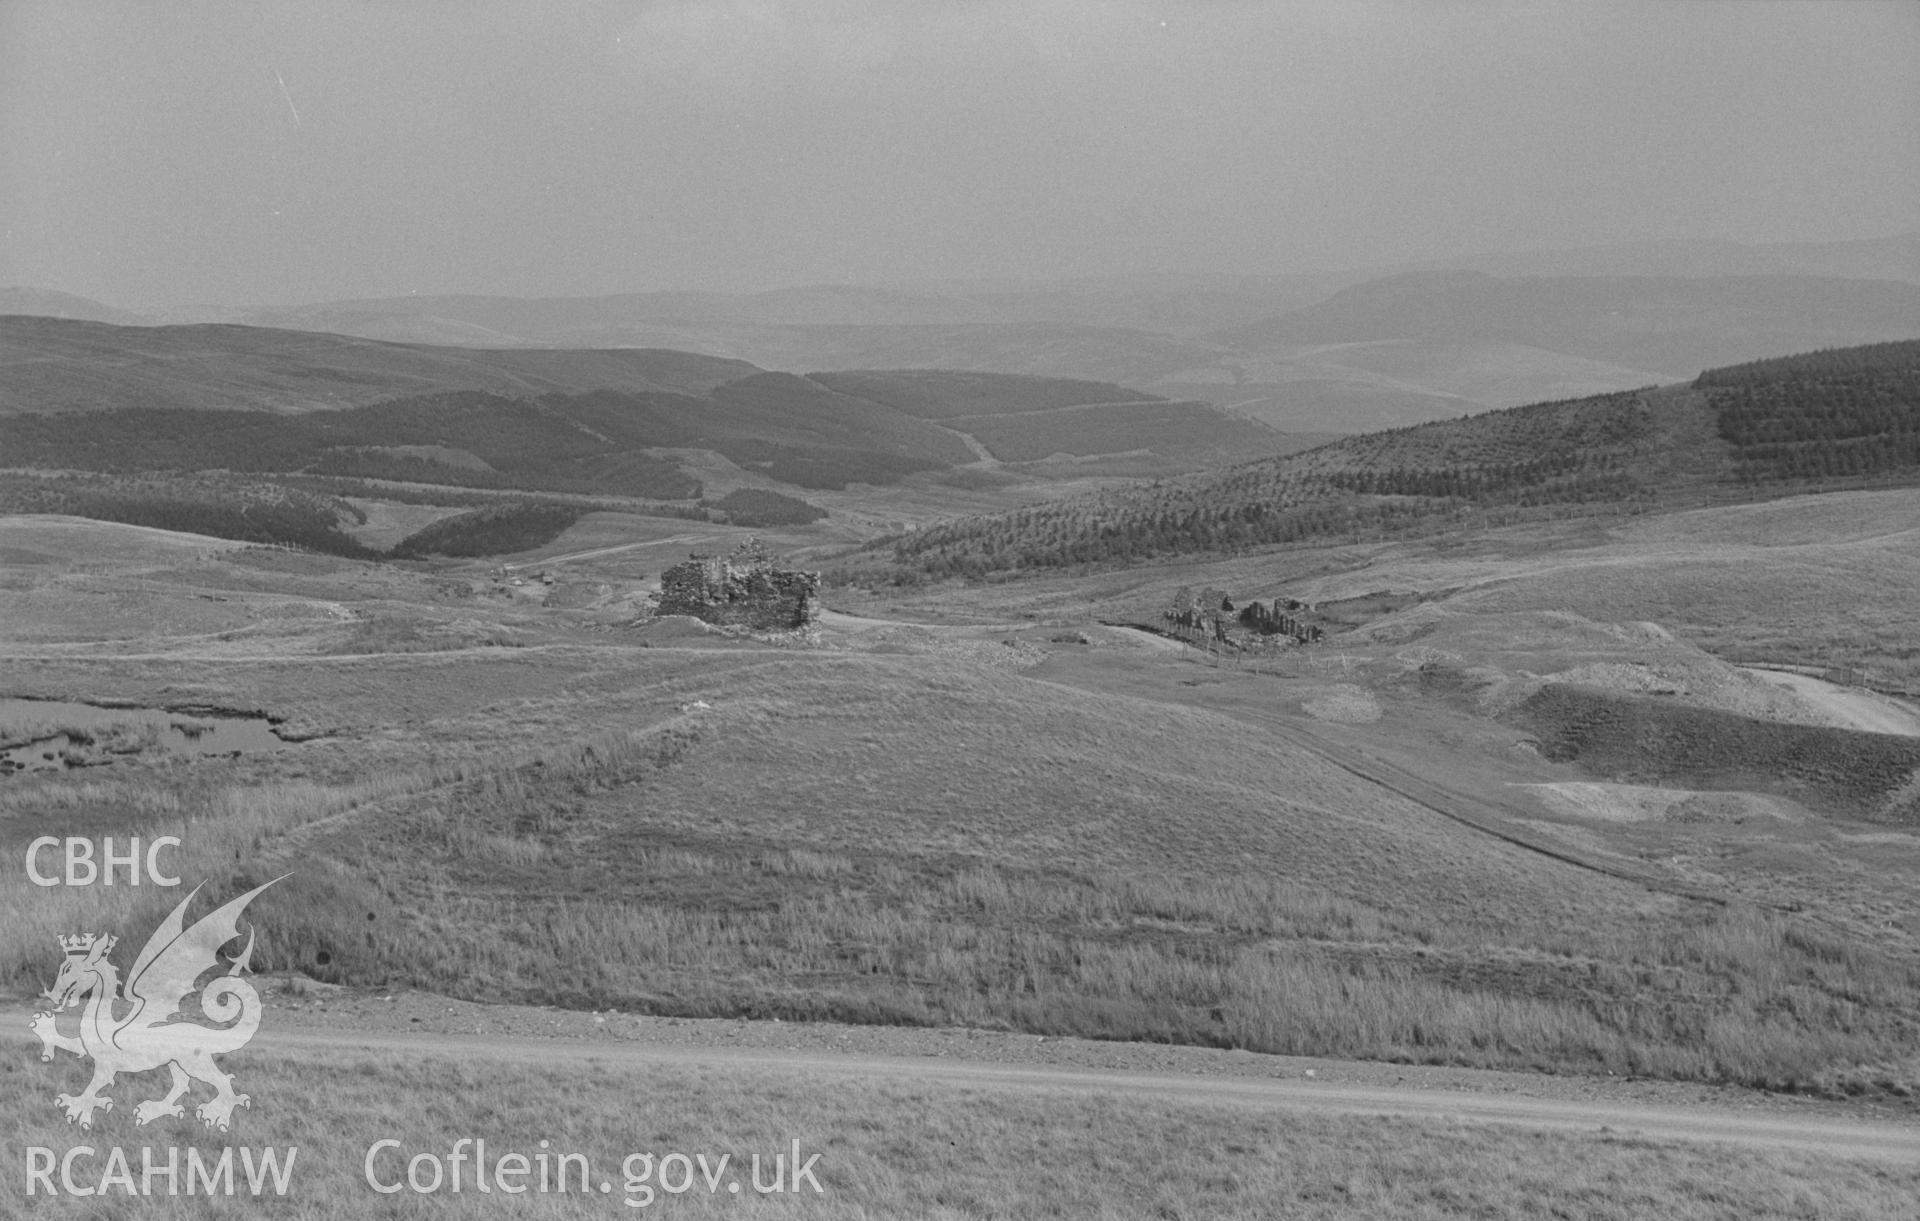 Digital copy of a black and white negative showing Esgair Hir lead mine from Banc Bwlchgarreg; Esgair-Fraith mine lower down valley in distance. Photographed by Arthur O. Chater on 22nd August 1967, looking east from Grid Reference SN 732 913.